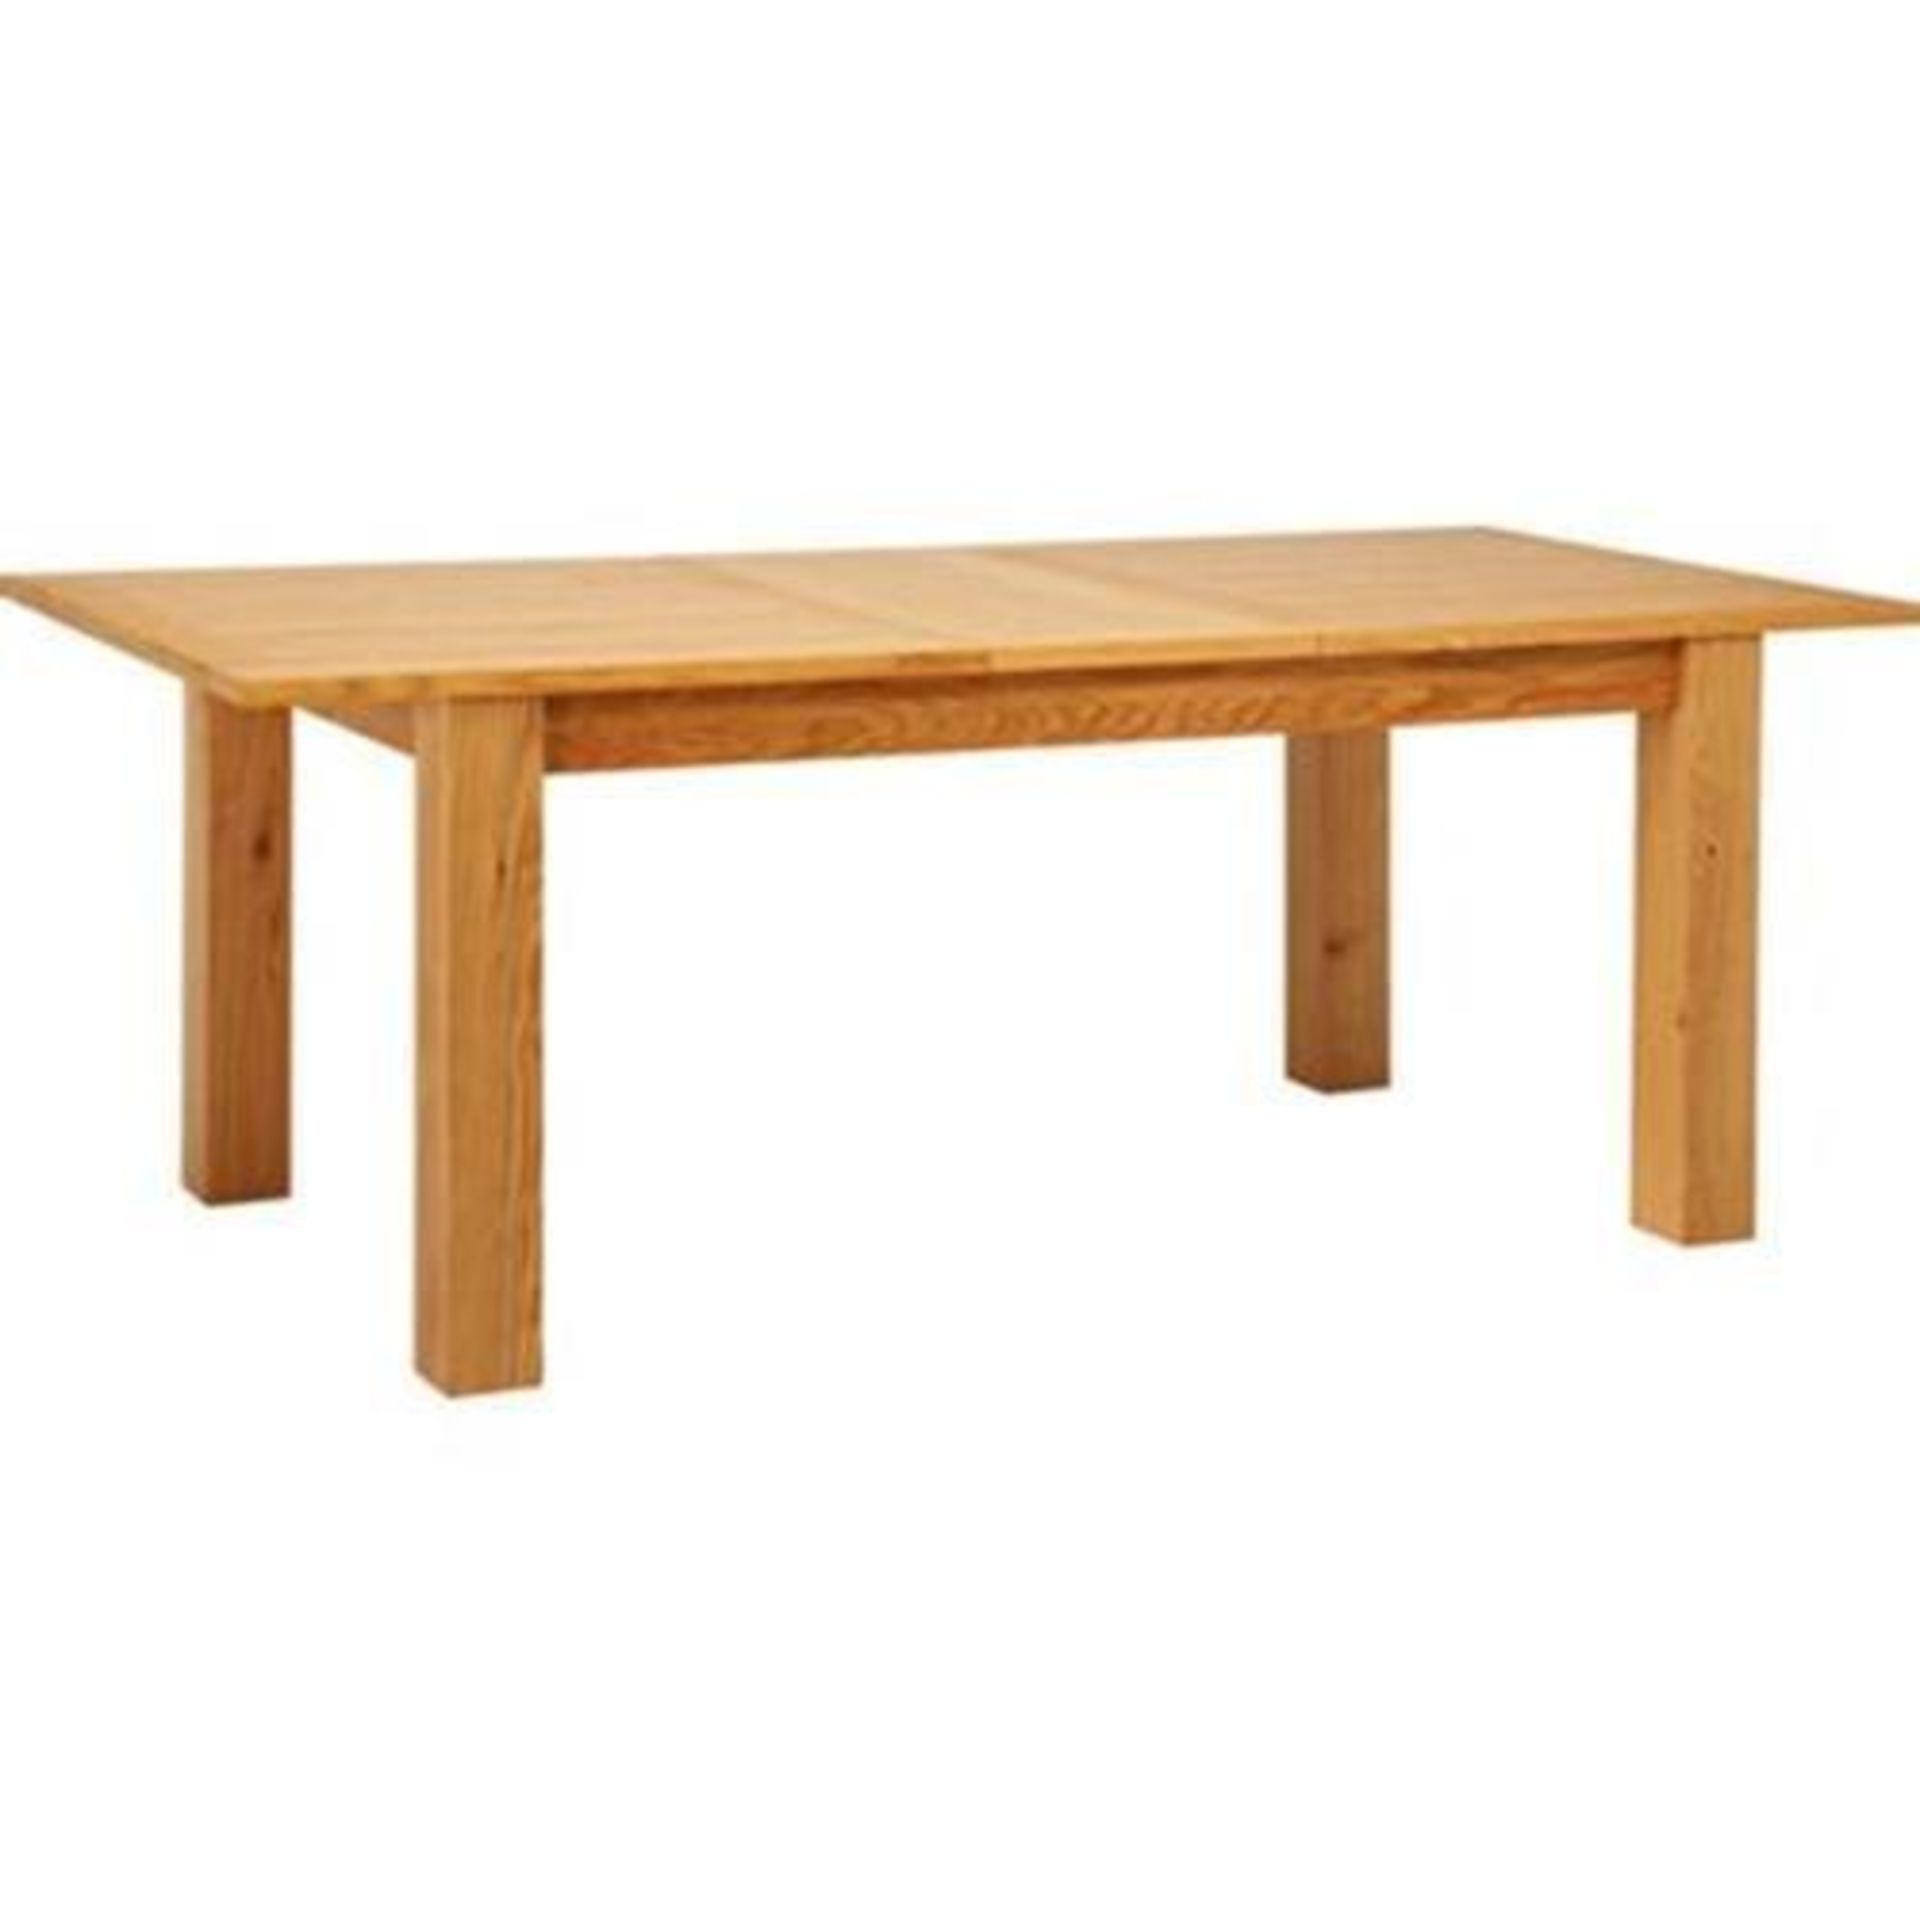 Schreiber Constable Oak Extension Dining Table - Image 3 of 3